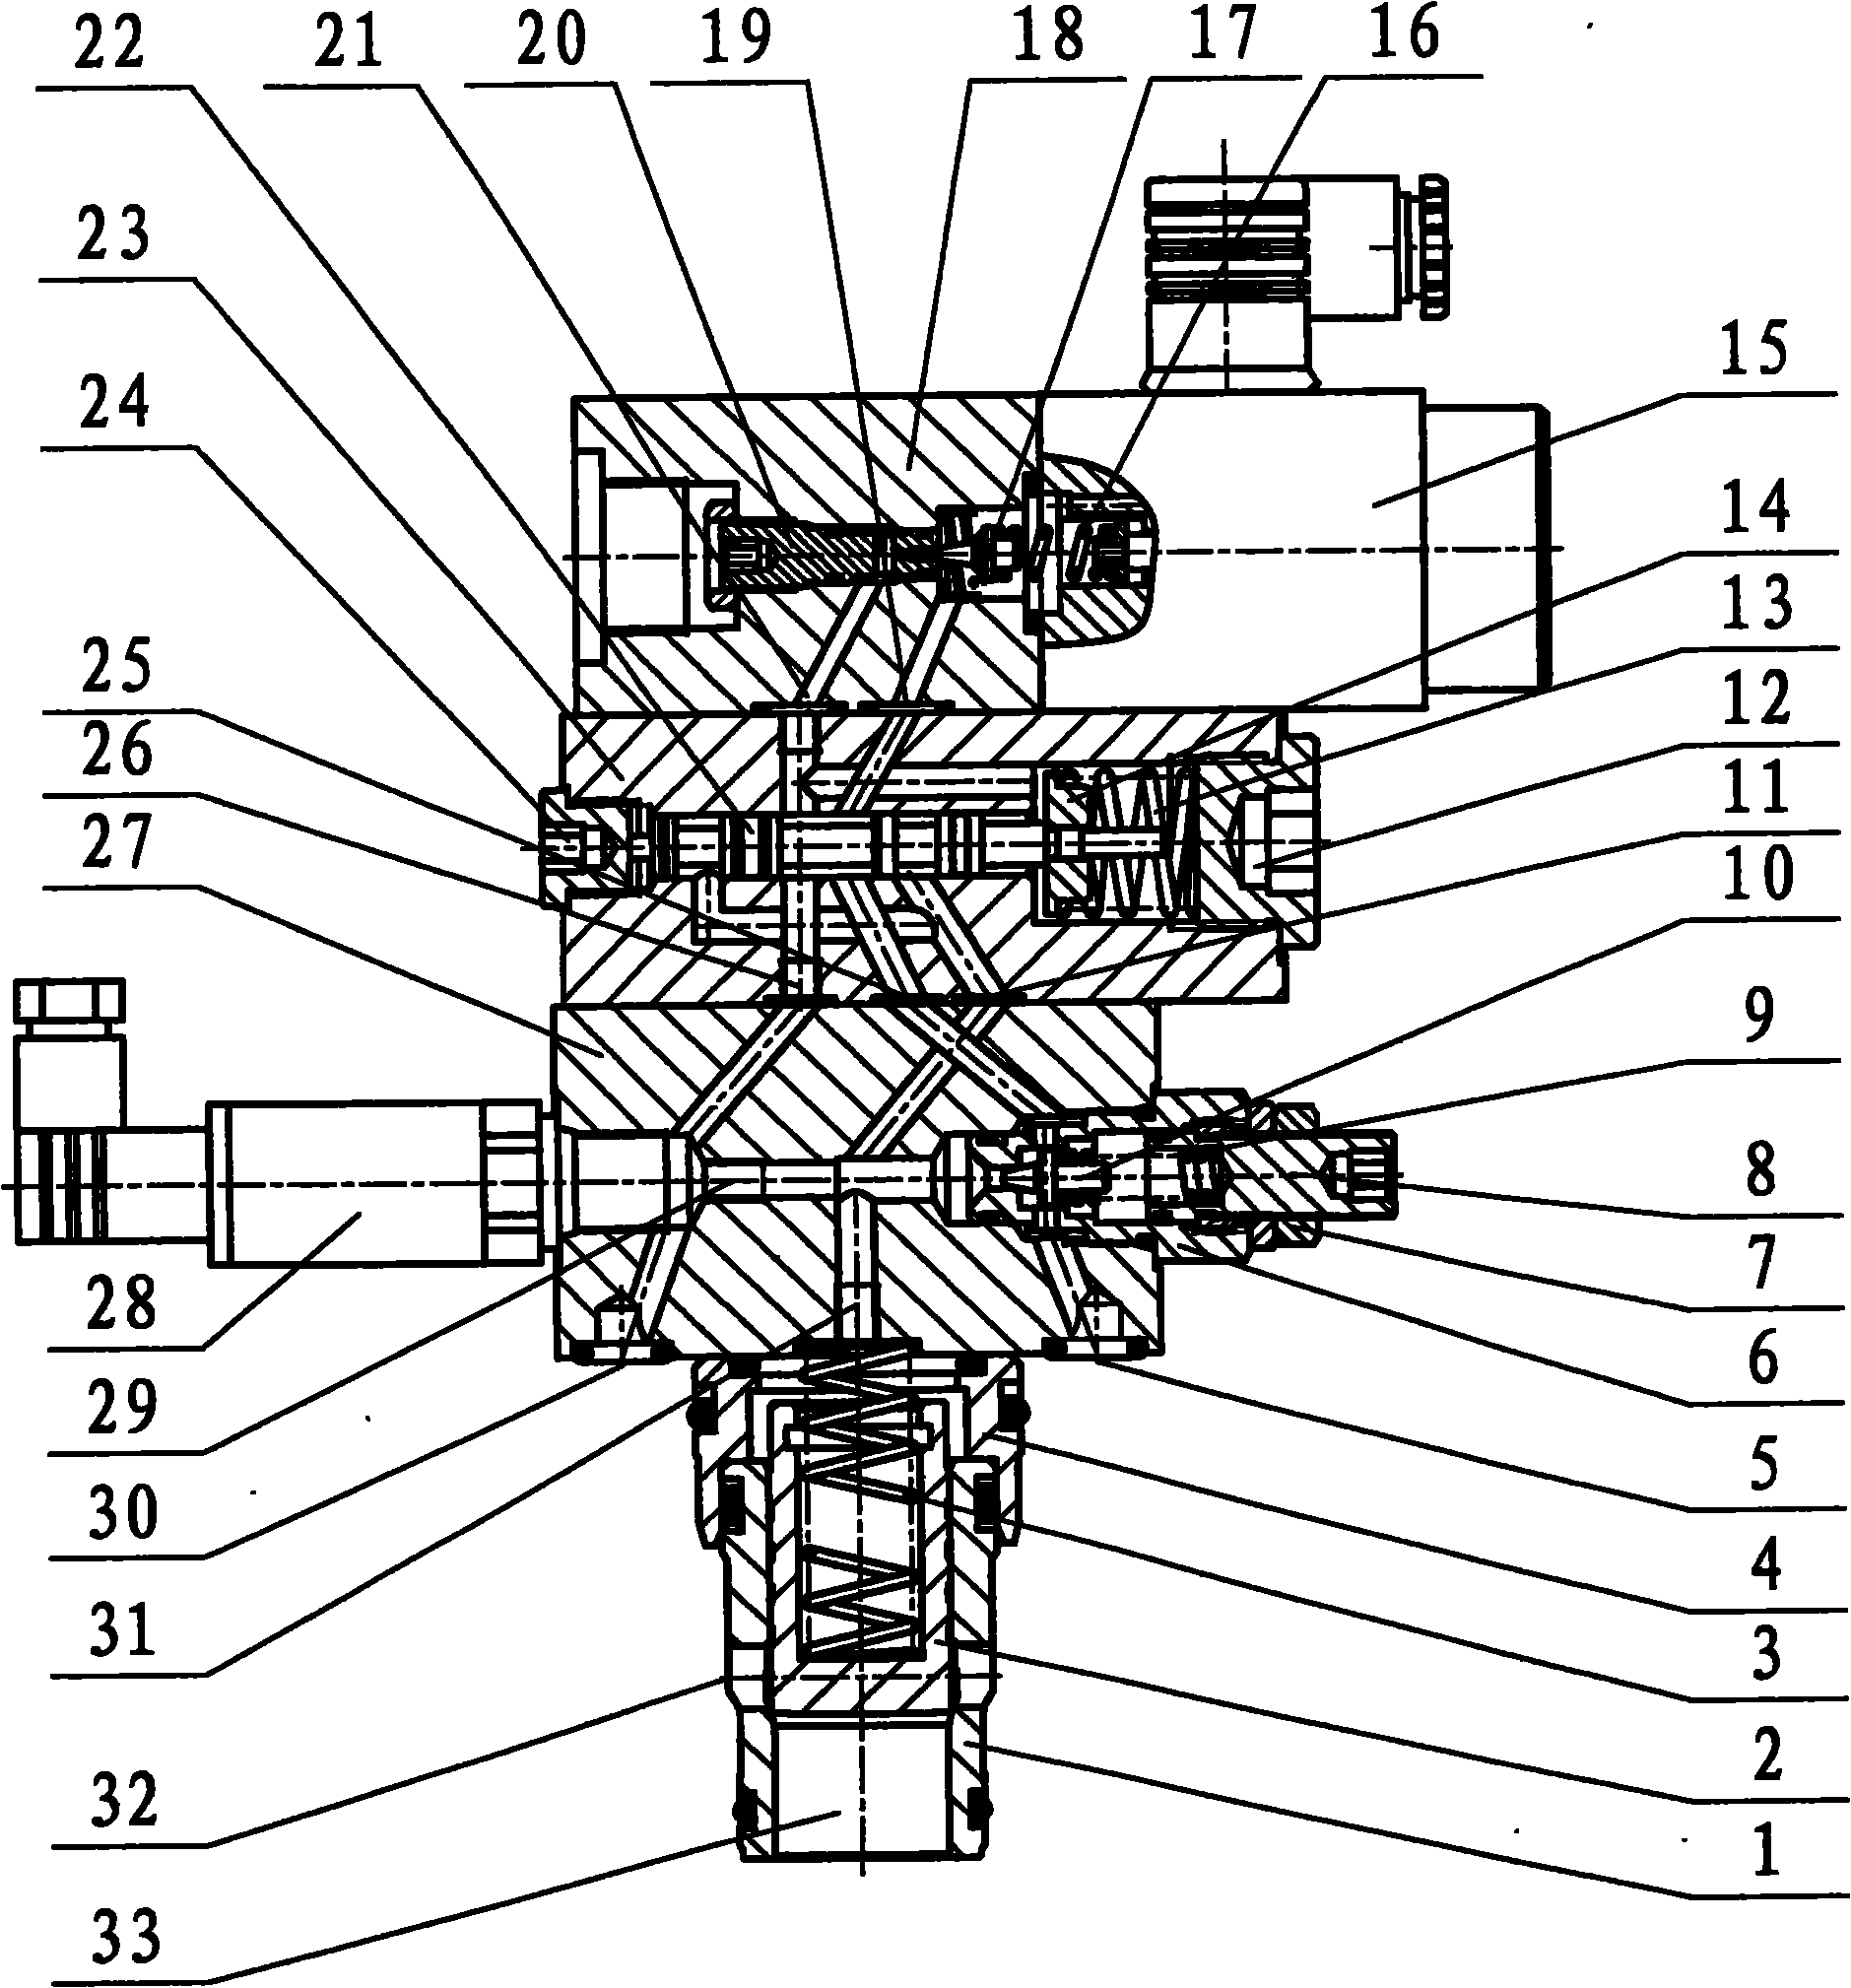 Pressure feedback secondary pilot control plugged-in type proportion relief valve system